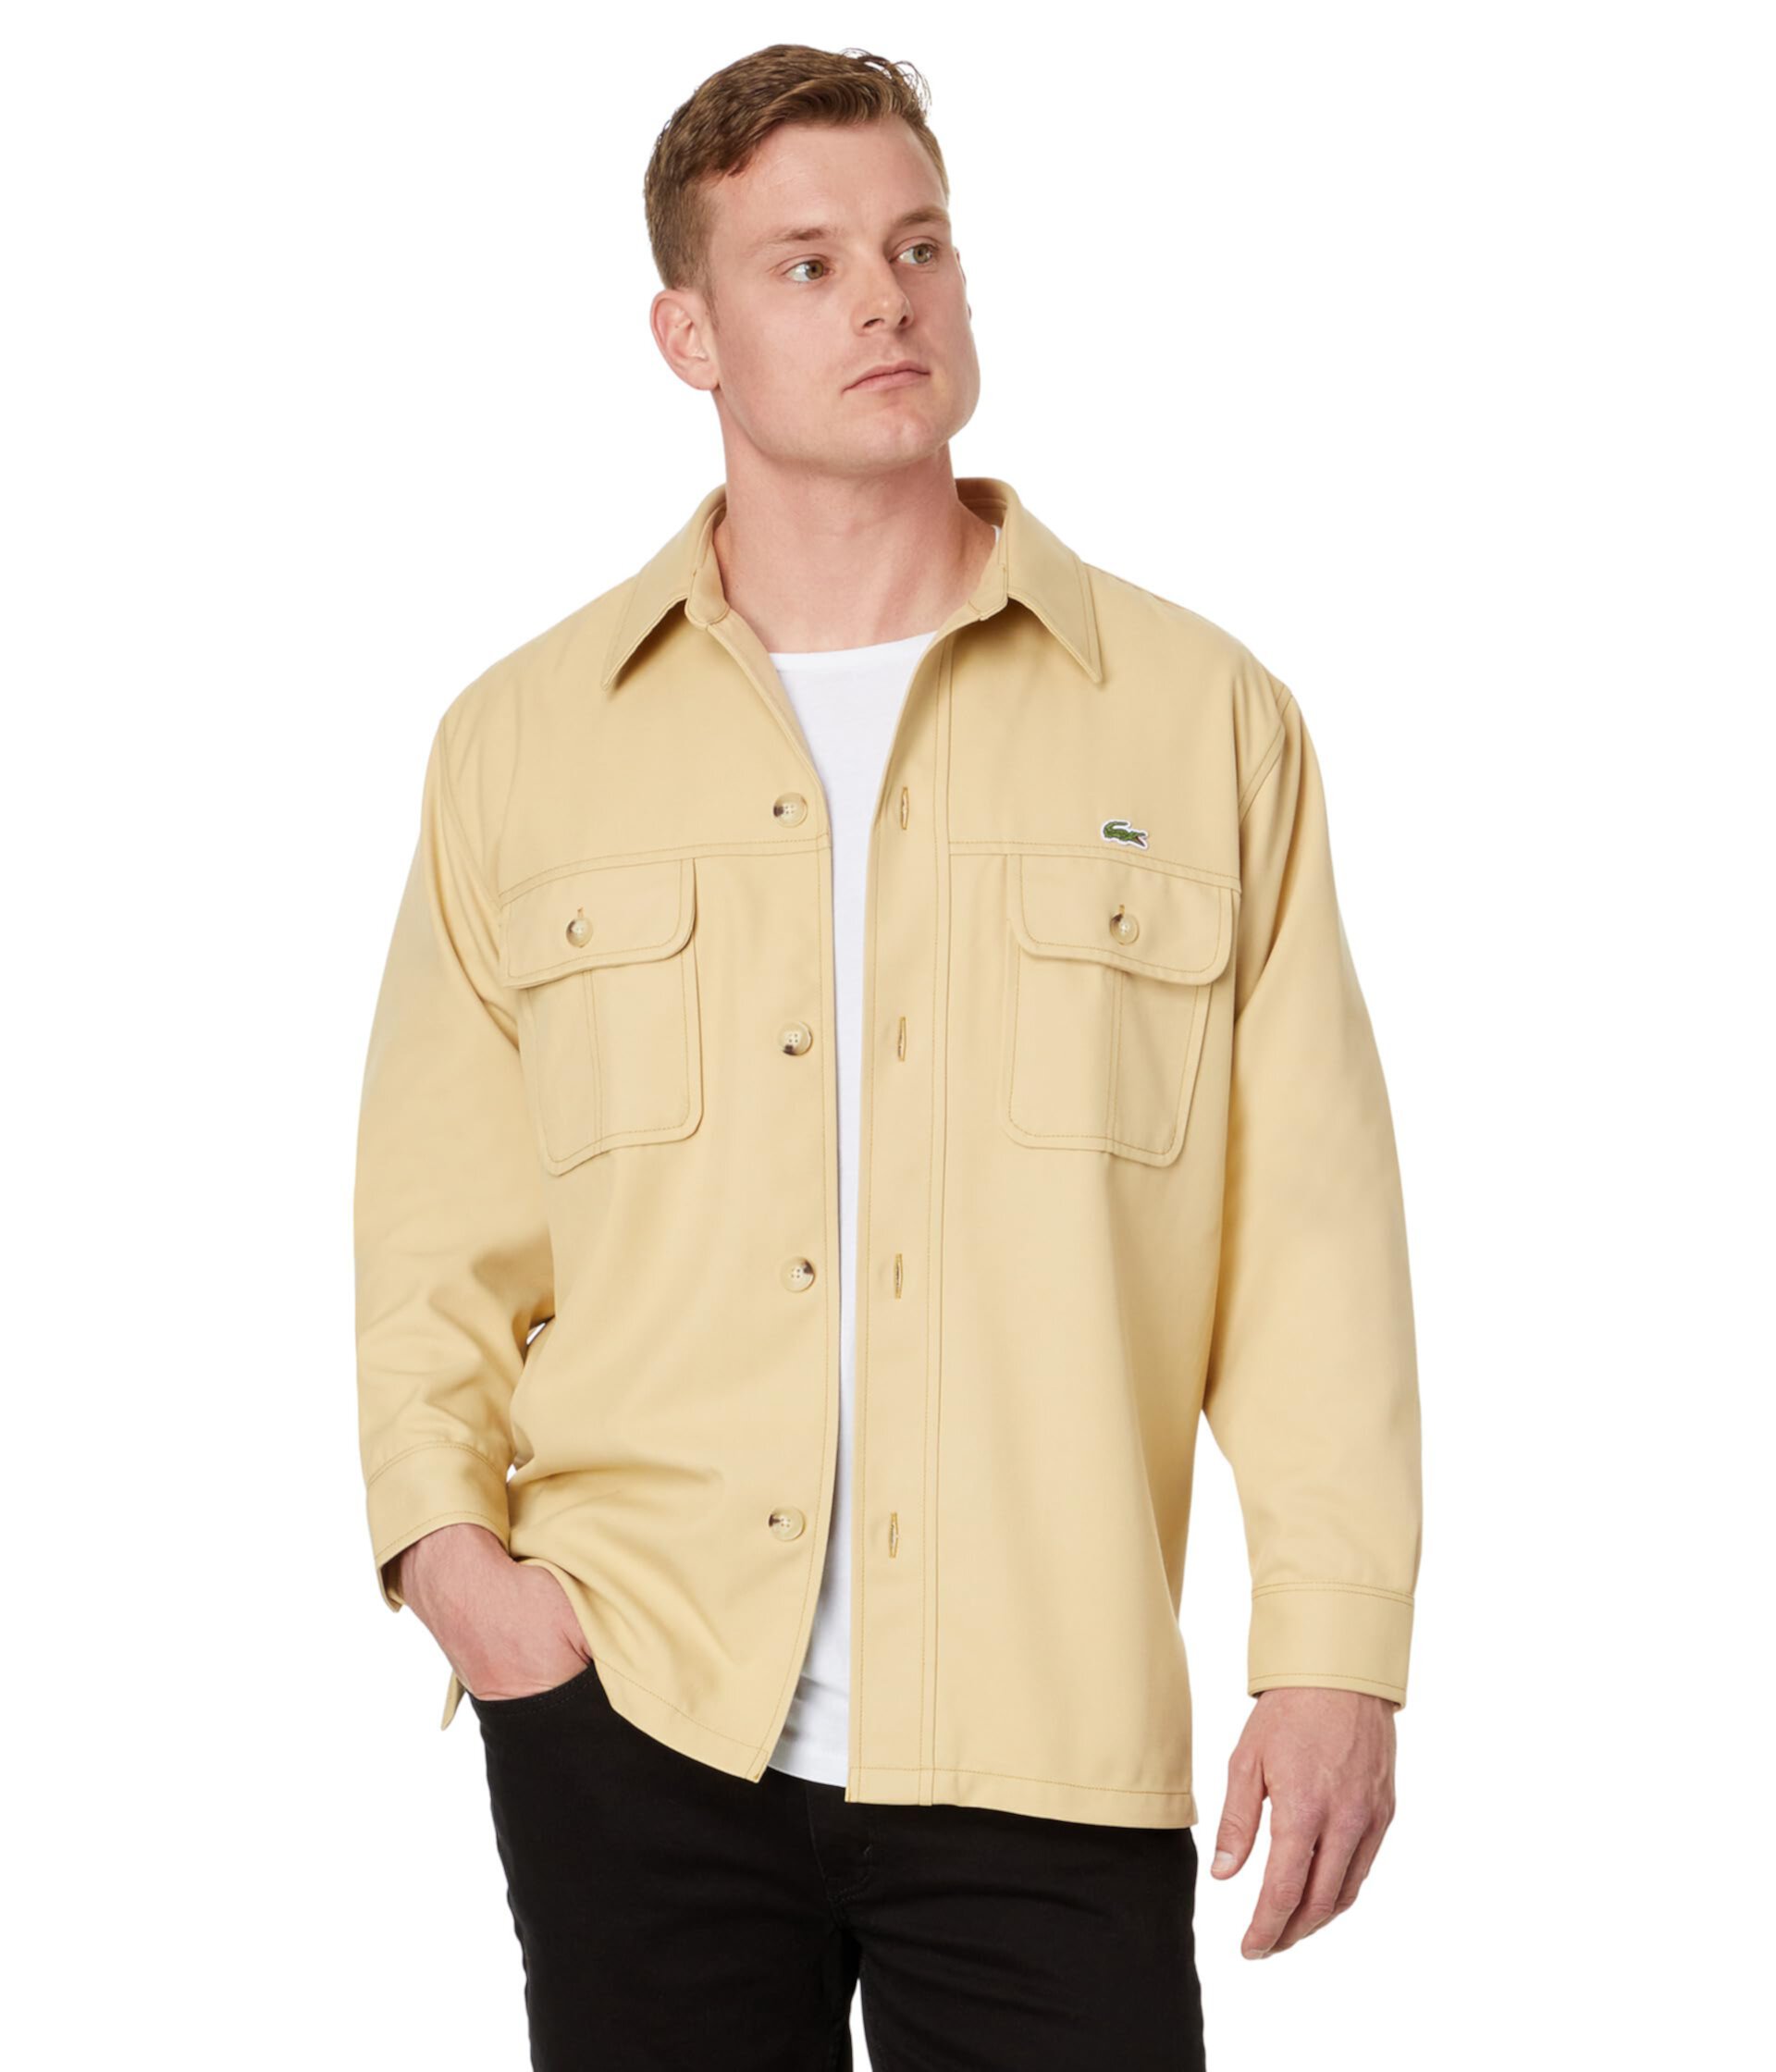 Long Sleeve Overshirt Fit Button-Down Shirt w/ Two Front Pockets Lacoste